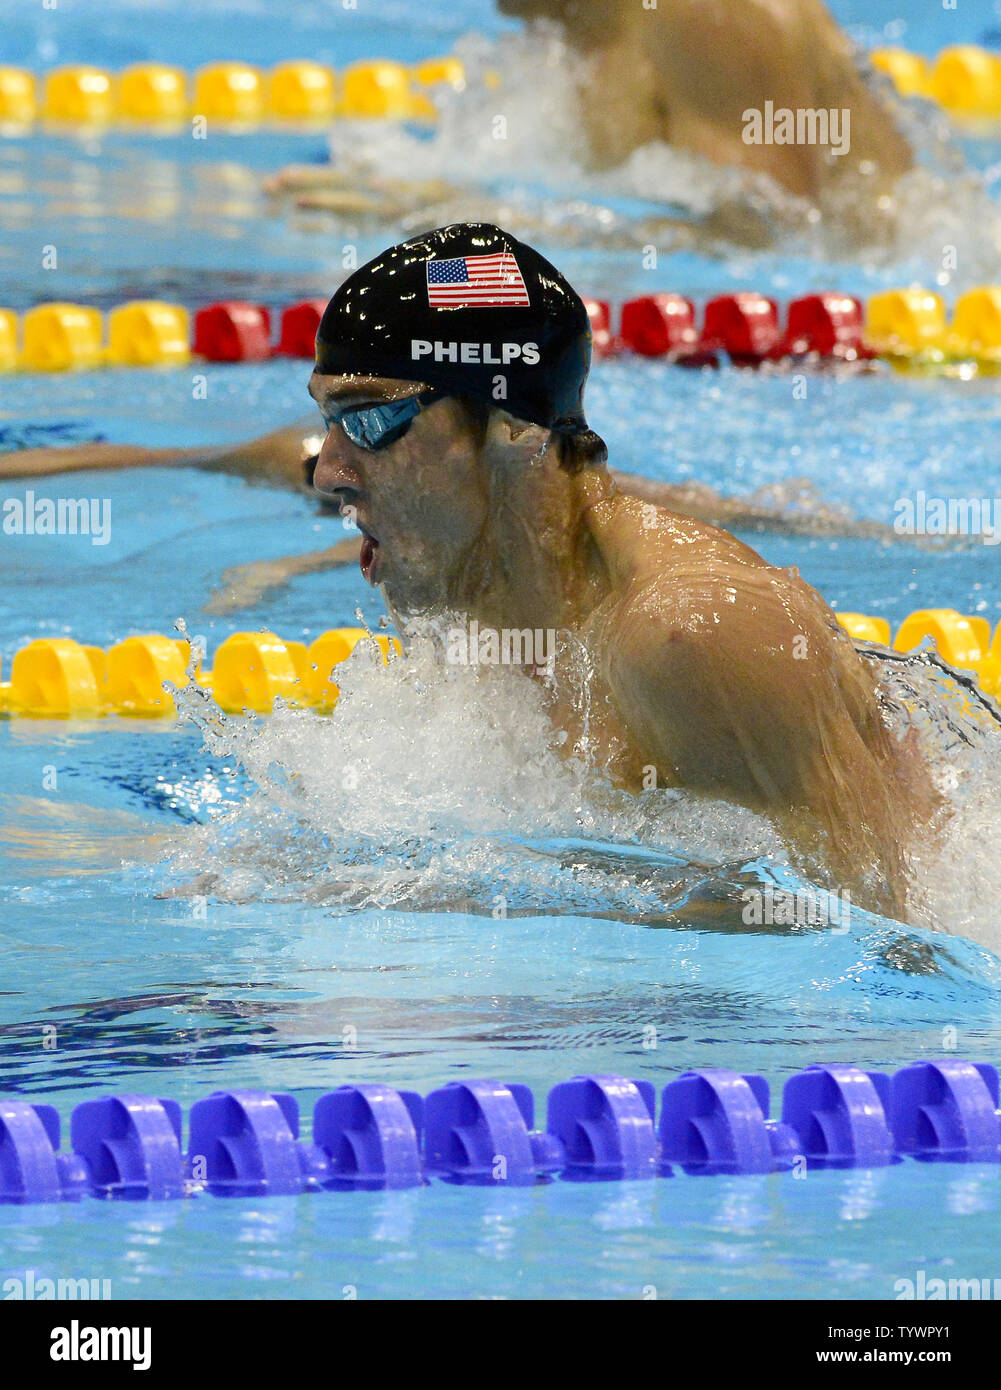 Michael Phelps competes in the Men's 200m Individual Medley Final at the London 2012 Summer Olympics on August 2, 2012 in London.  Phelps won the Gold Medal, finishing with a time of 1:54.27.  UPI/Ron Sachs Stock Photo